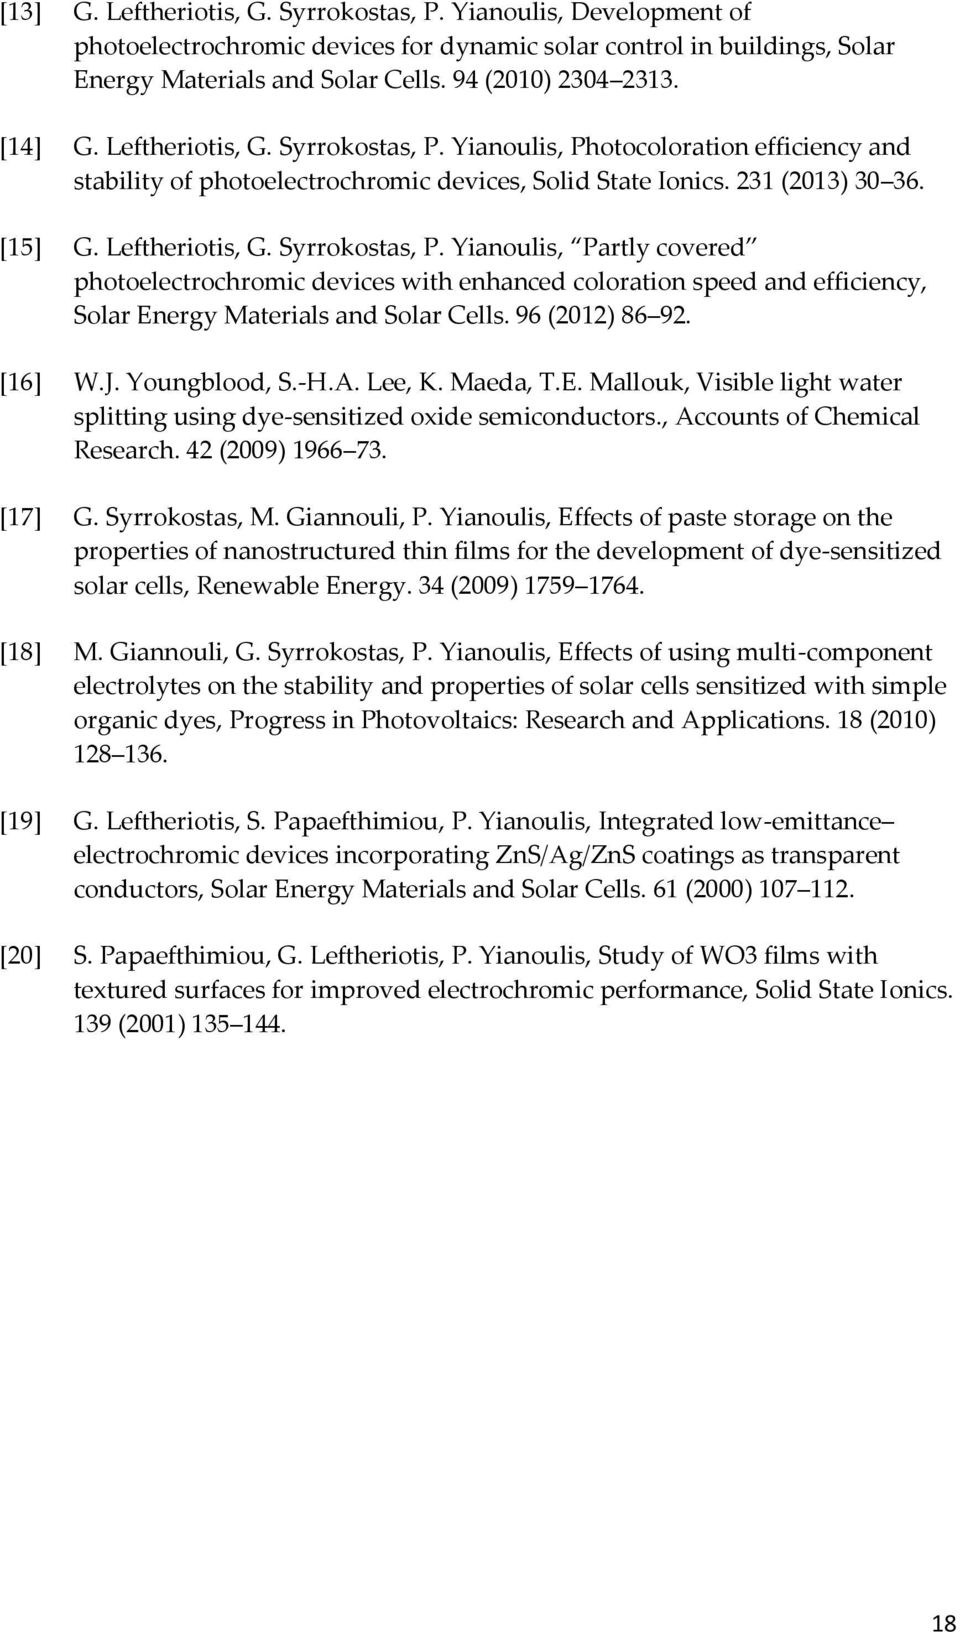 96 (2012) 86 92. [16] W.J. Youngblood, S.-H.A. Lee, K. Maeda, T.E. Mallouk, Visible light water splitting using dye-sensitized oxide semiconductors., Accounts of Chemical Research. 42 (2009) 1966 73.